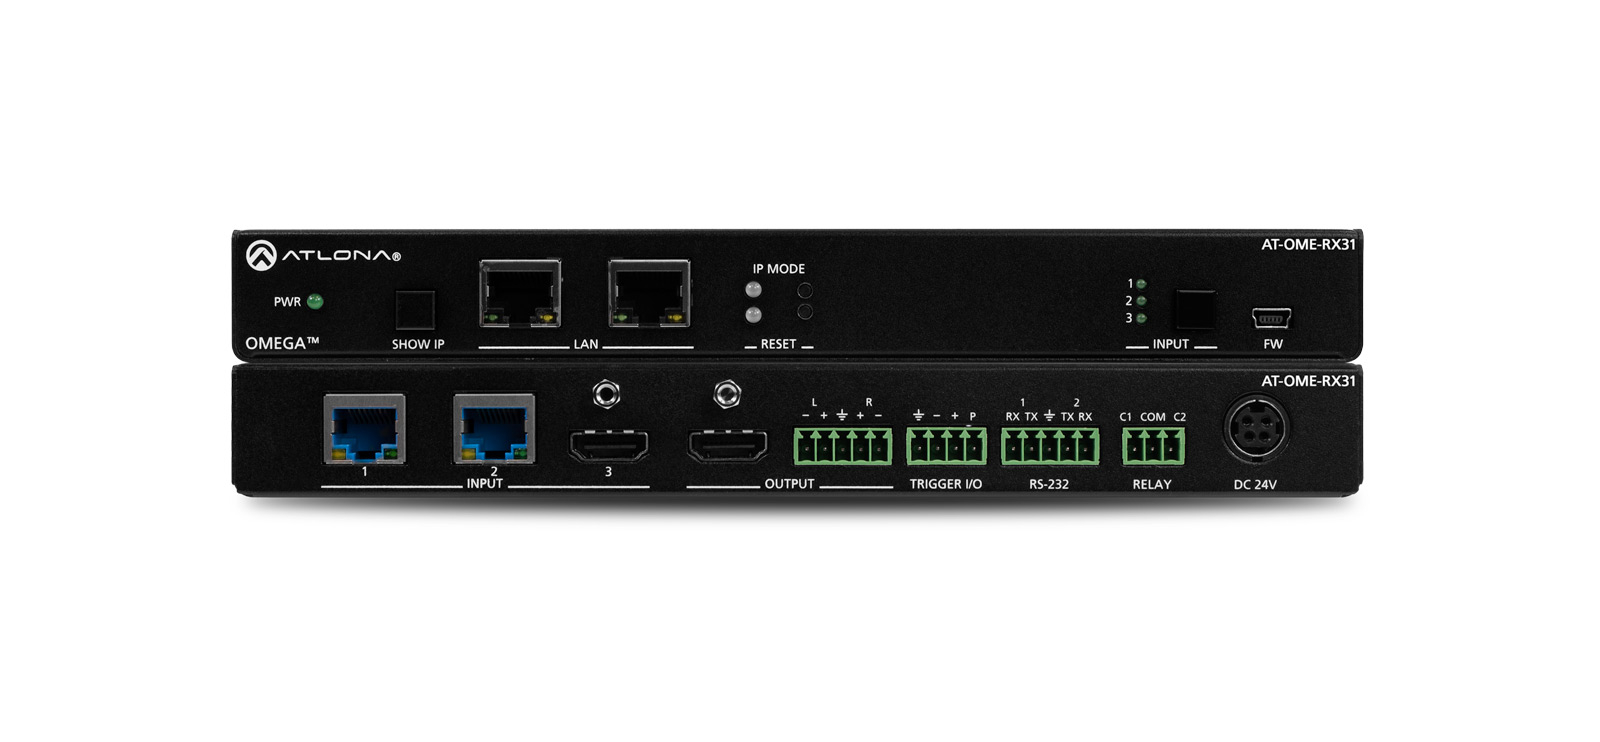 Atlona AT-OME-RX31 - HDBaseT Receiver, Switcher